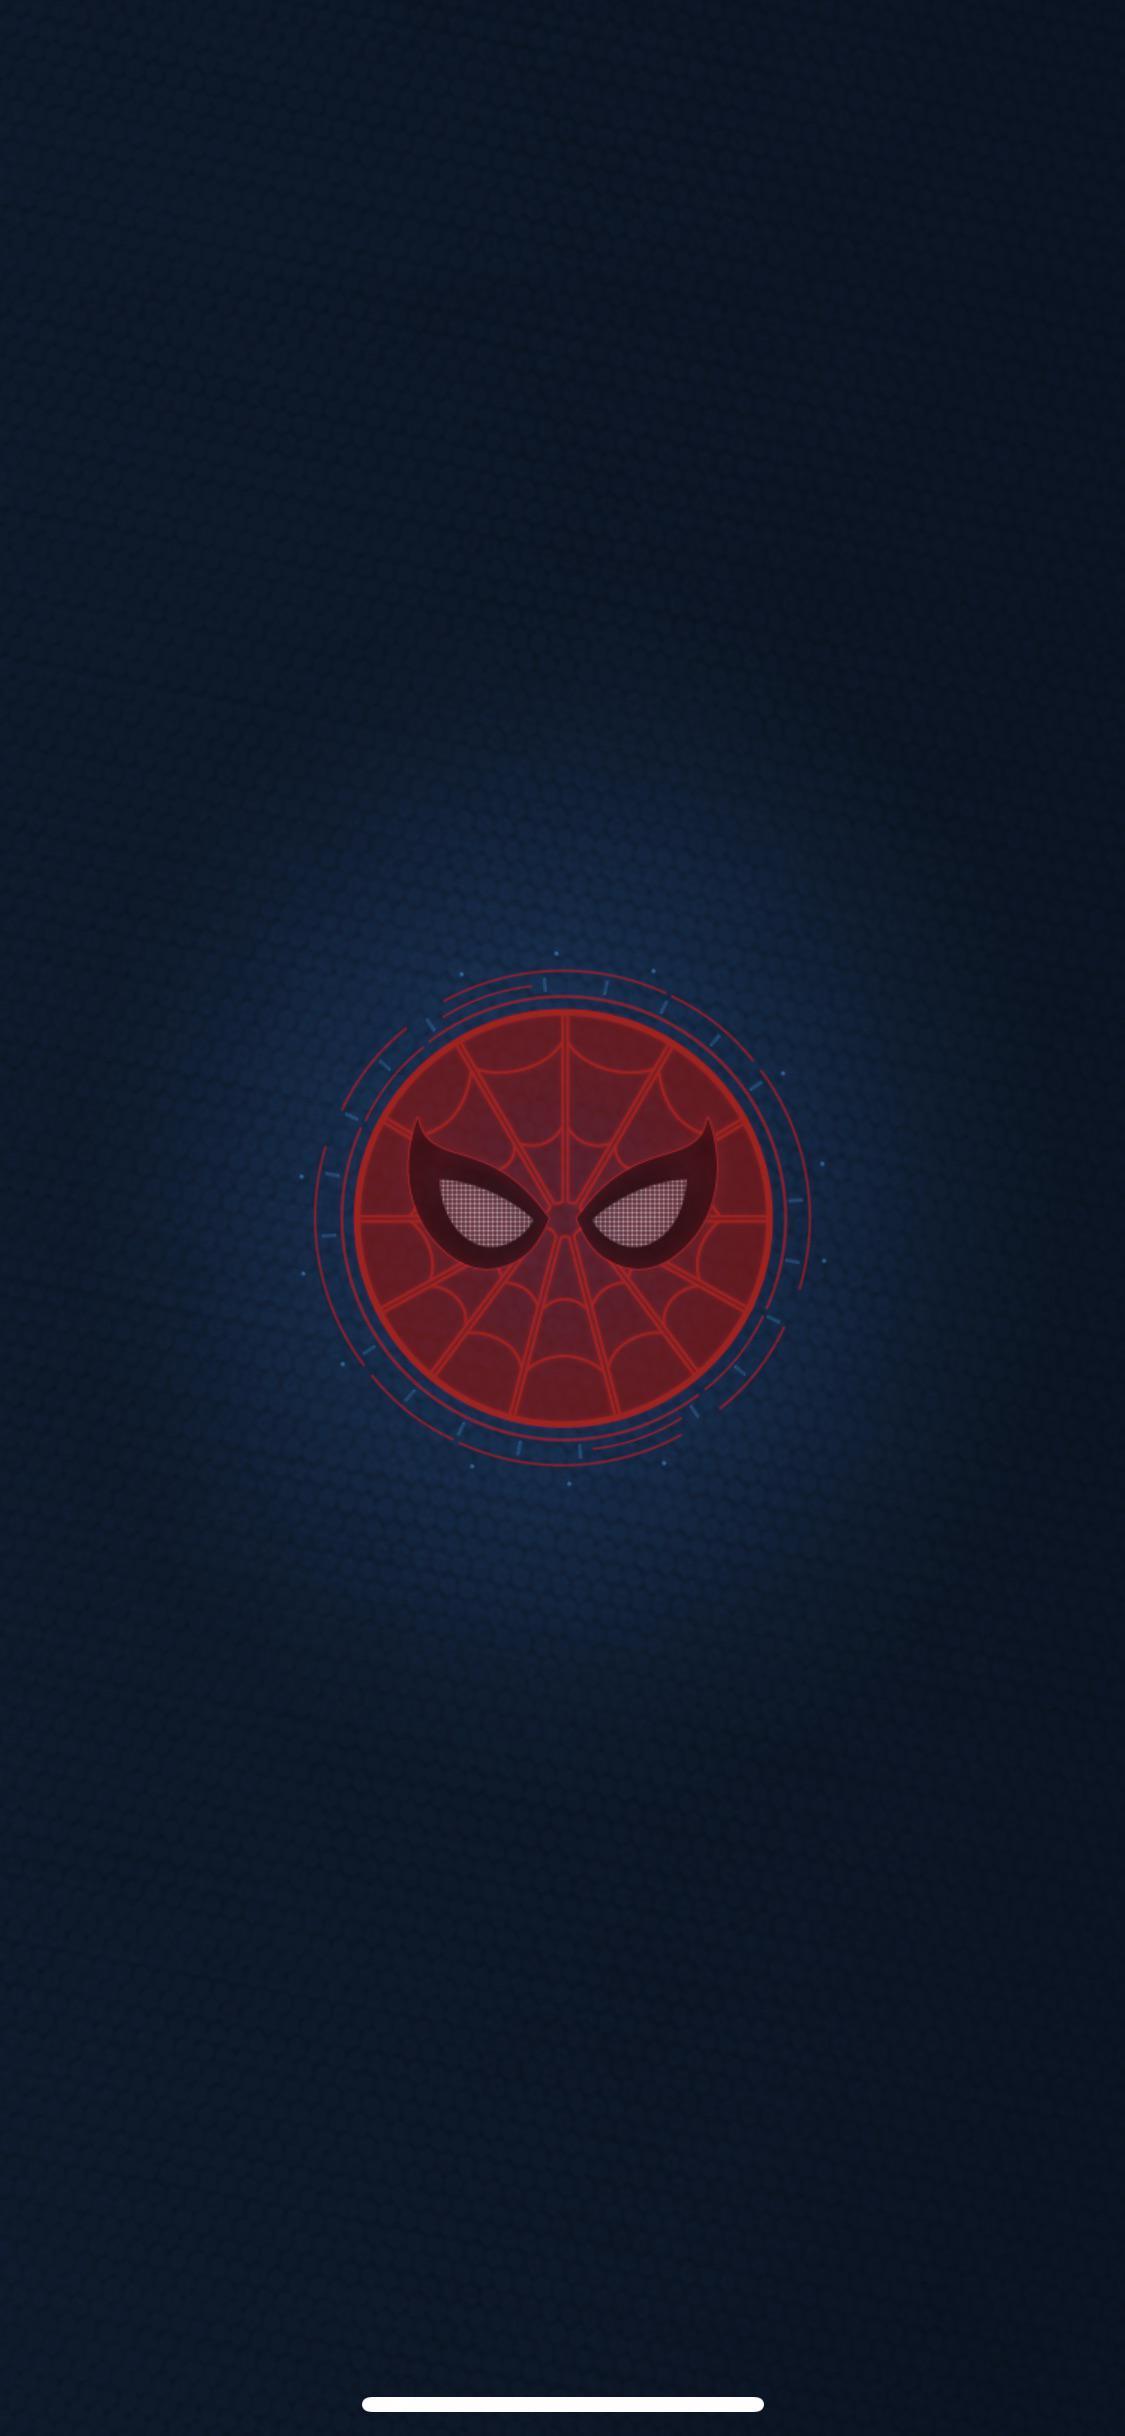 Spider Man Wallpaper I'm Currently Using, Took It From